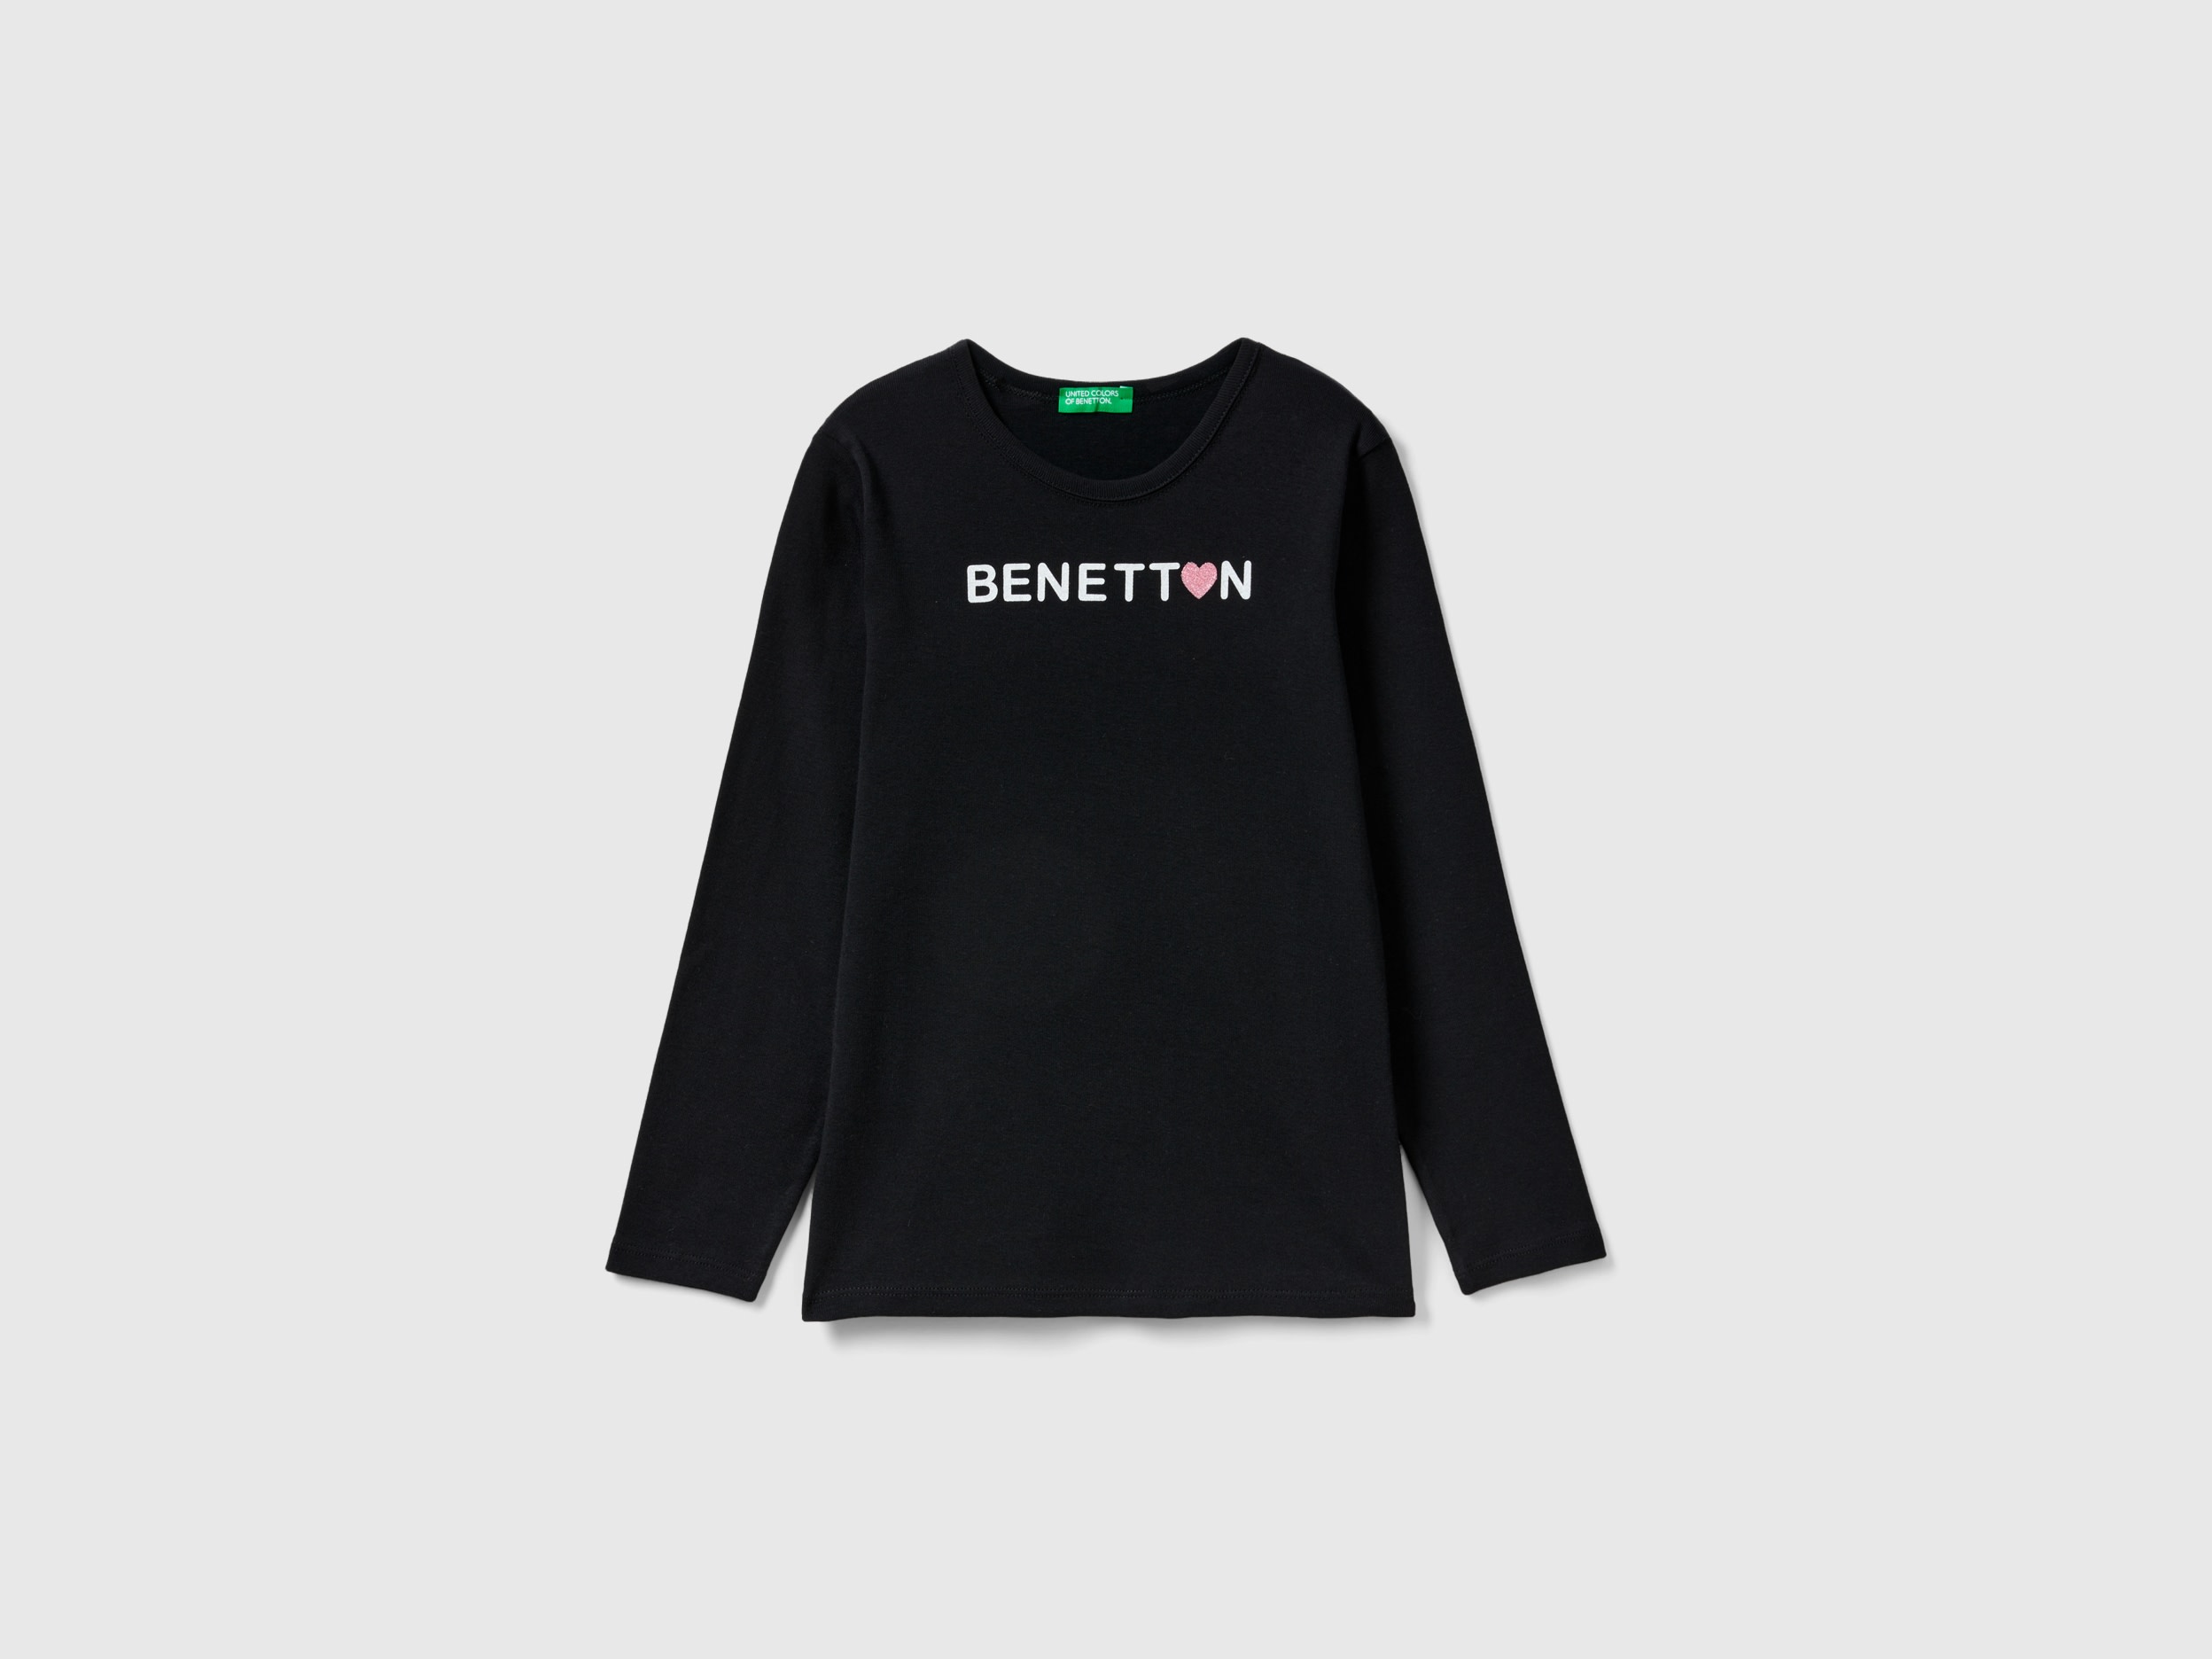 Image of Benetton, Long Sleeve T-shirt With Glitter Print, size S, Black, Kids